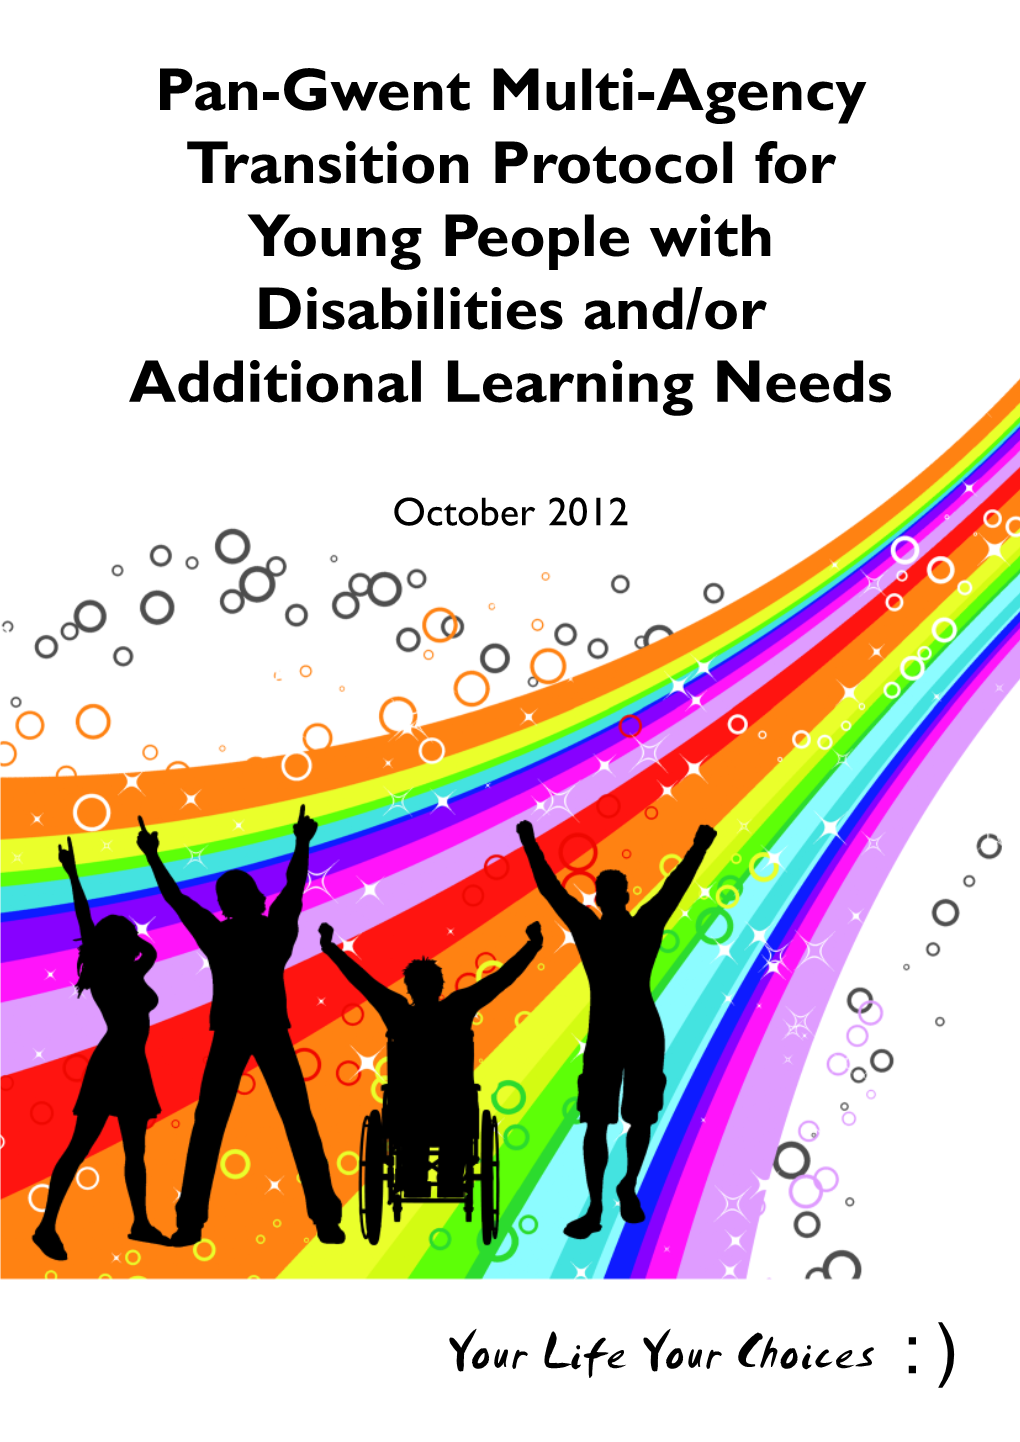 Pan-Gwent Multi-Agency Transition Protocol for Young People with Disabilities And/Or Additional Learning Needs